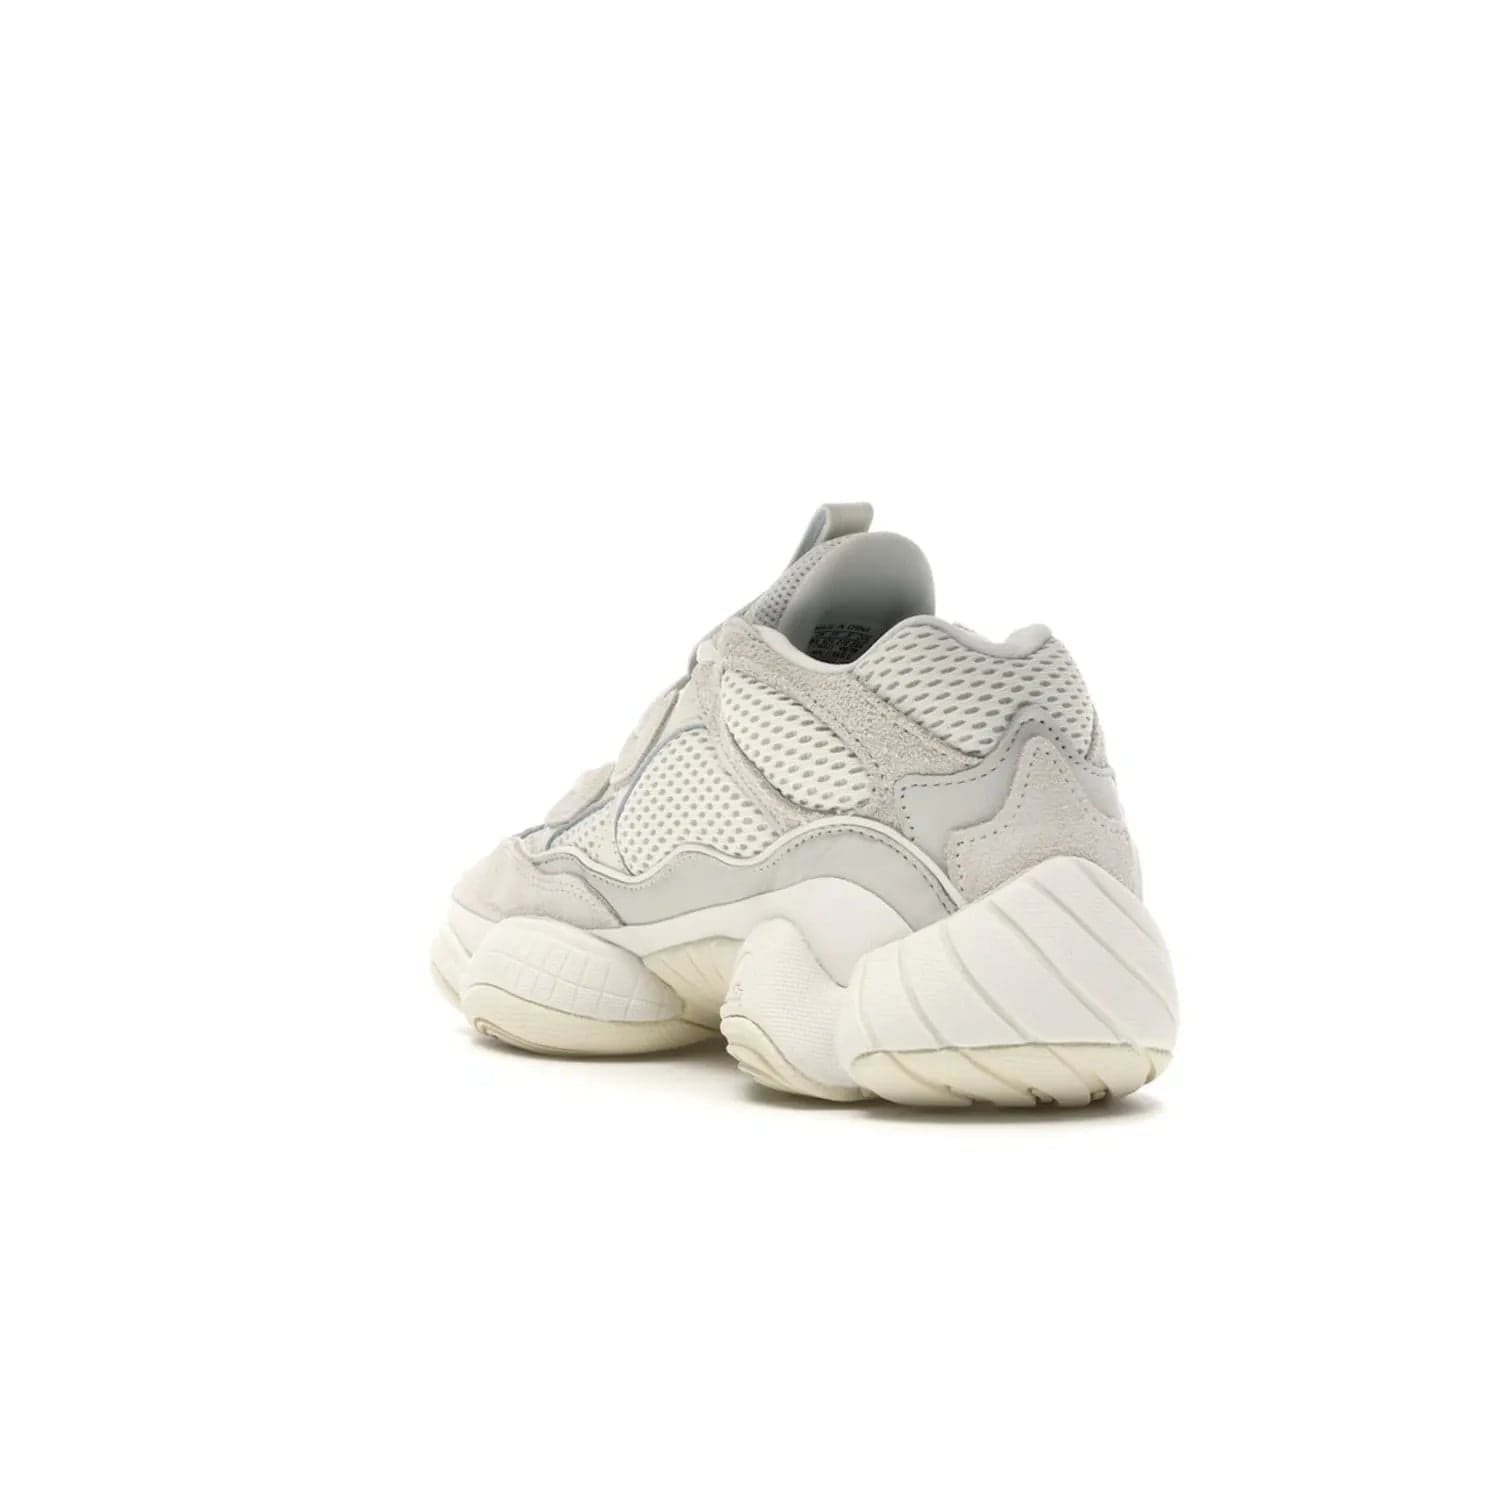 adidas Yeezy 500 Bone White - Image 25 - Only at www.BallersClubKickz.com - Classic look perfect for any sneaker collection. The adidas Yeezy 500 "Bone White" blends a white mesh upper with suede overlays & a chunky midsole inspired by the Adidas KB3. Complimented by a tonal-cream outsole, this timeless style is a must-have.